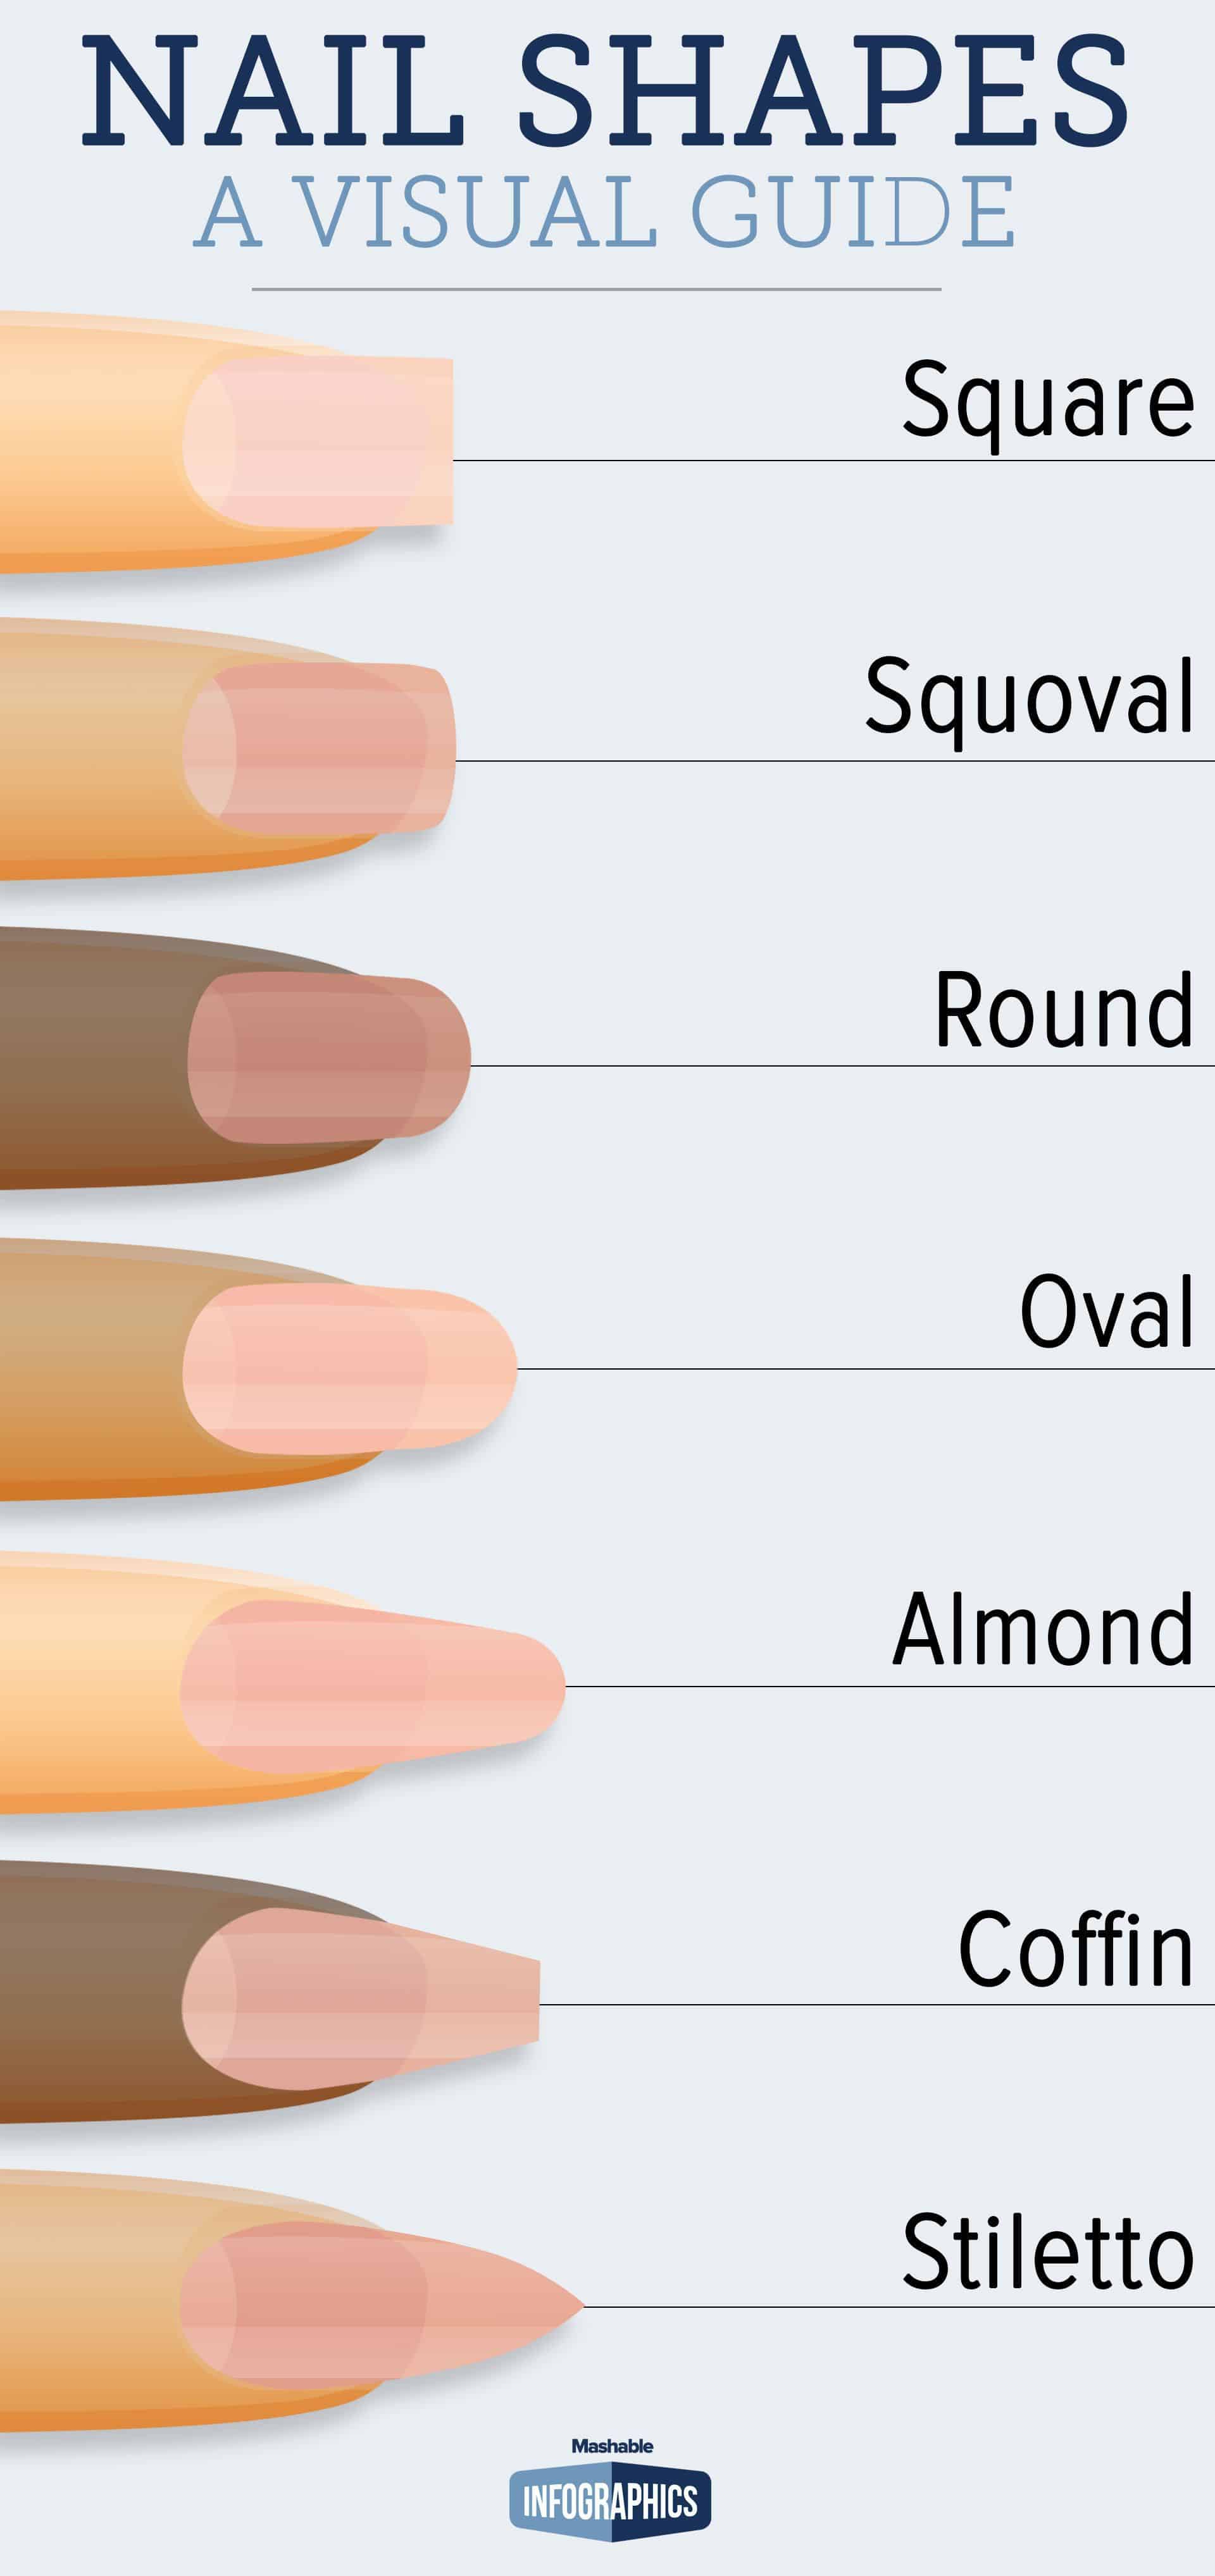 Before Your Next Manicure, Look At This Guide To Fingernail Shapes ...